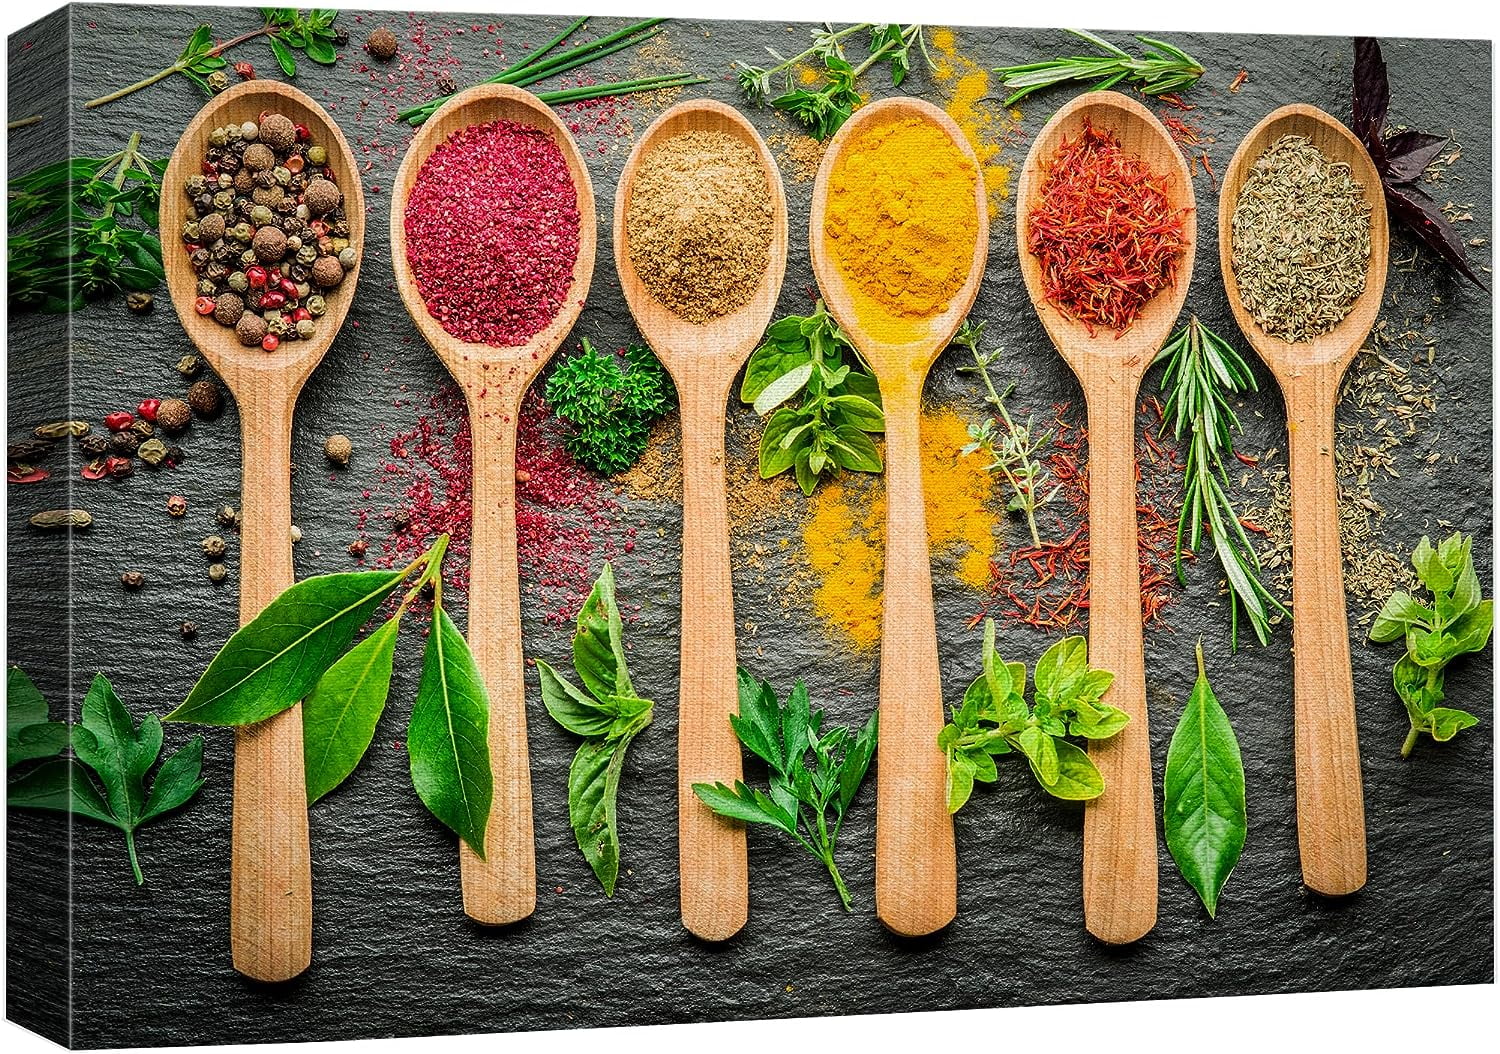 Canvas Print Wall Art Herbs and Spice in Spoons Kitchen  Cooking Food  Photography Modern Art Realism Decorative Scenic Colorful Relax/Cozy/Zen  for Living Room, Bedroom, Office 12